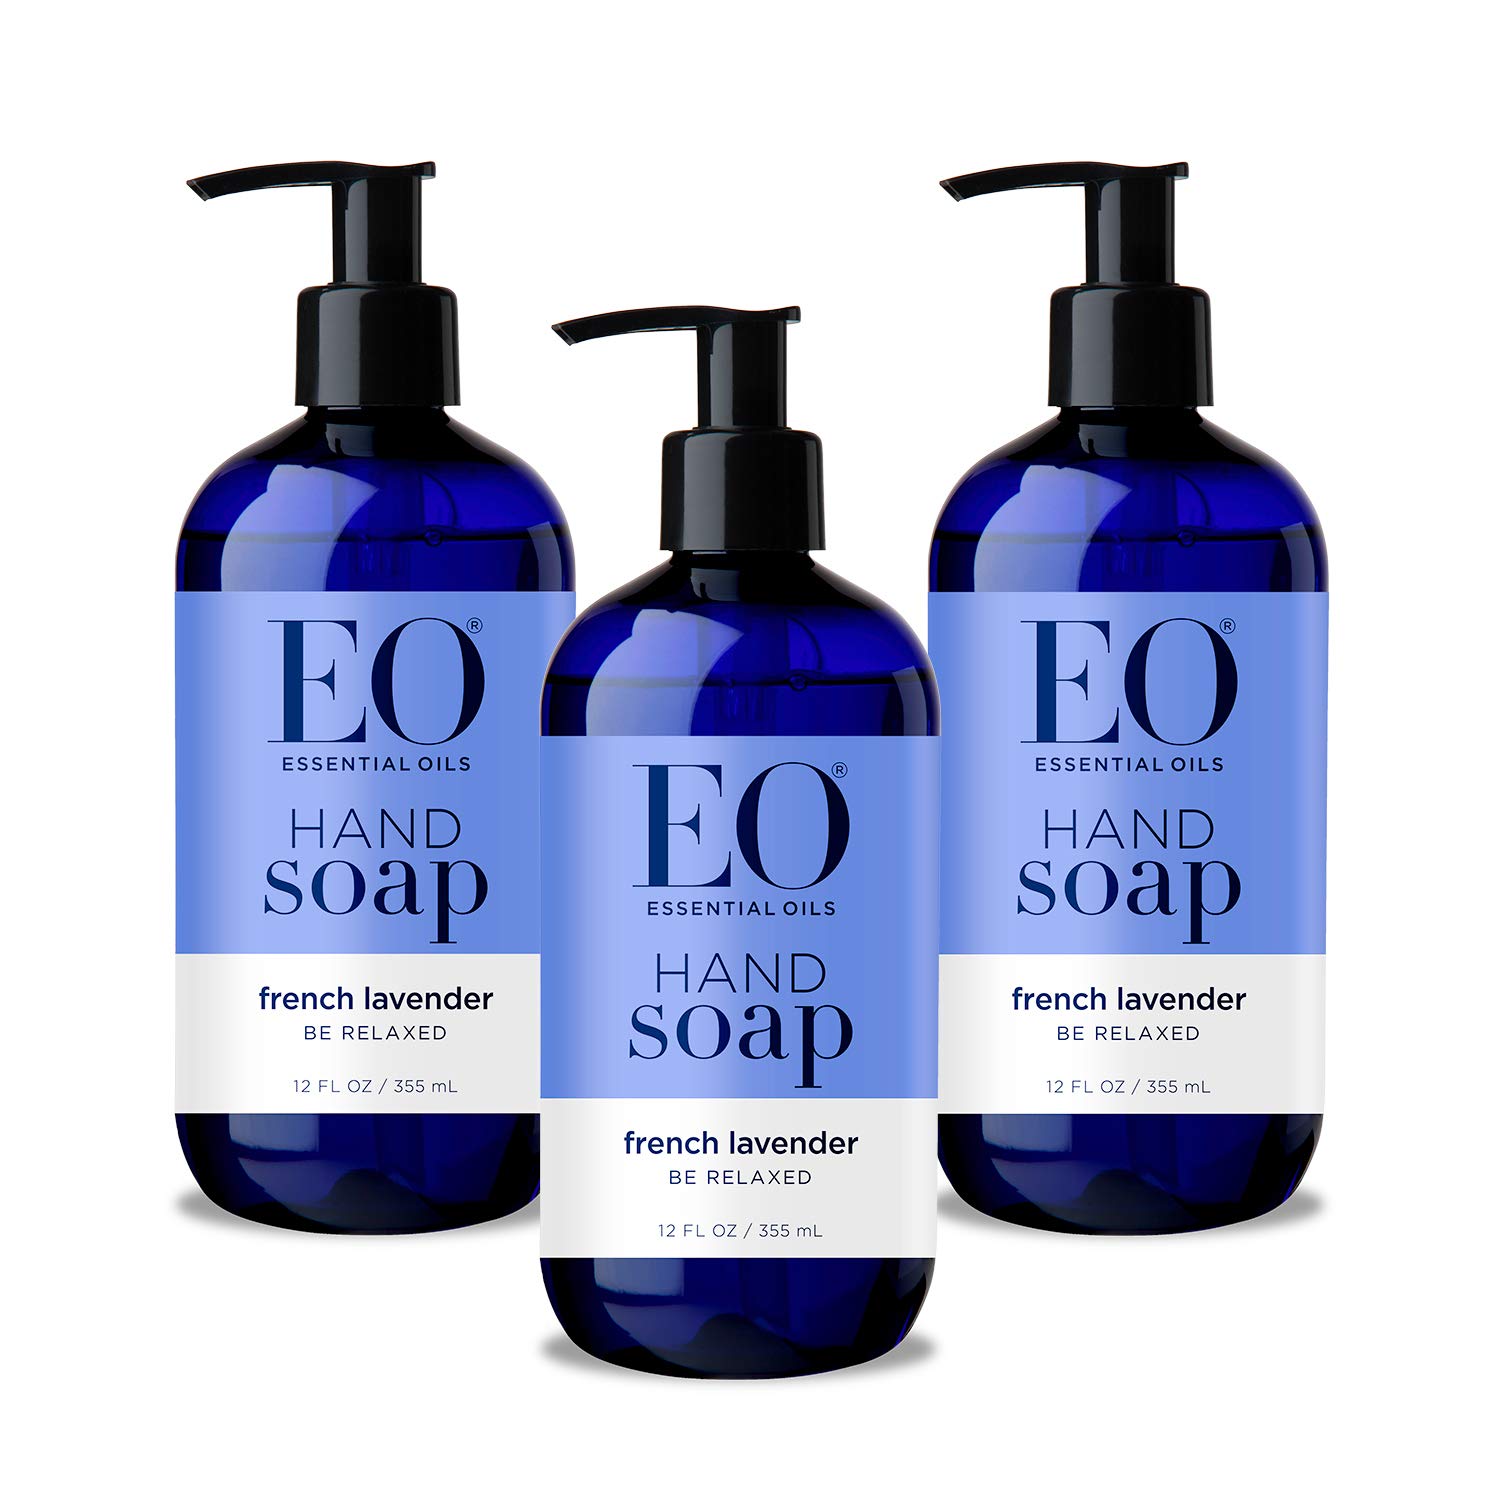 EO Sulfate-Free Moisturizing Hand Soap - French Lavender - 12 Ounces - 3 Count